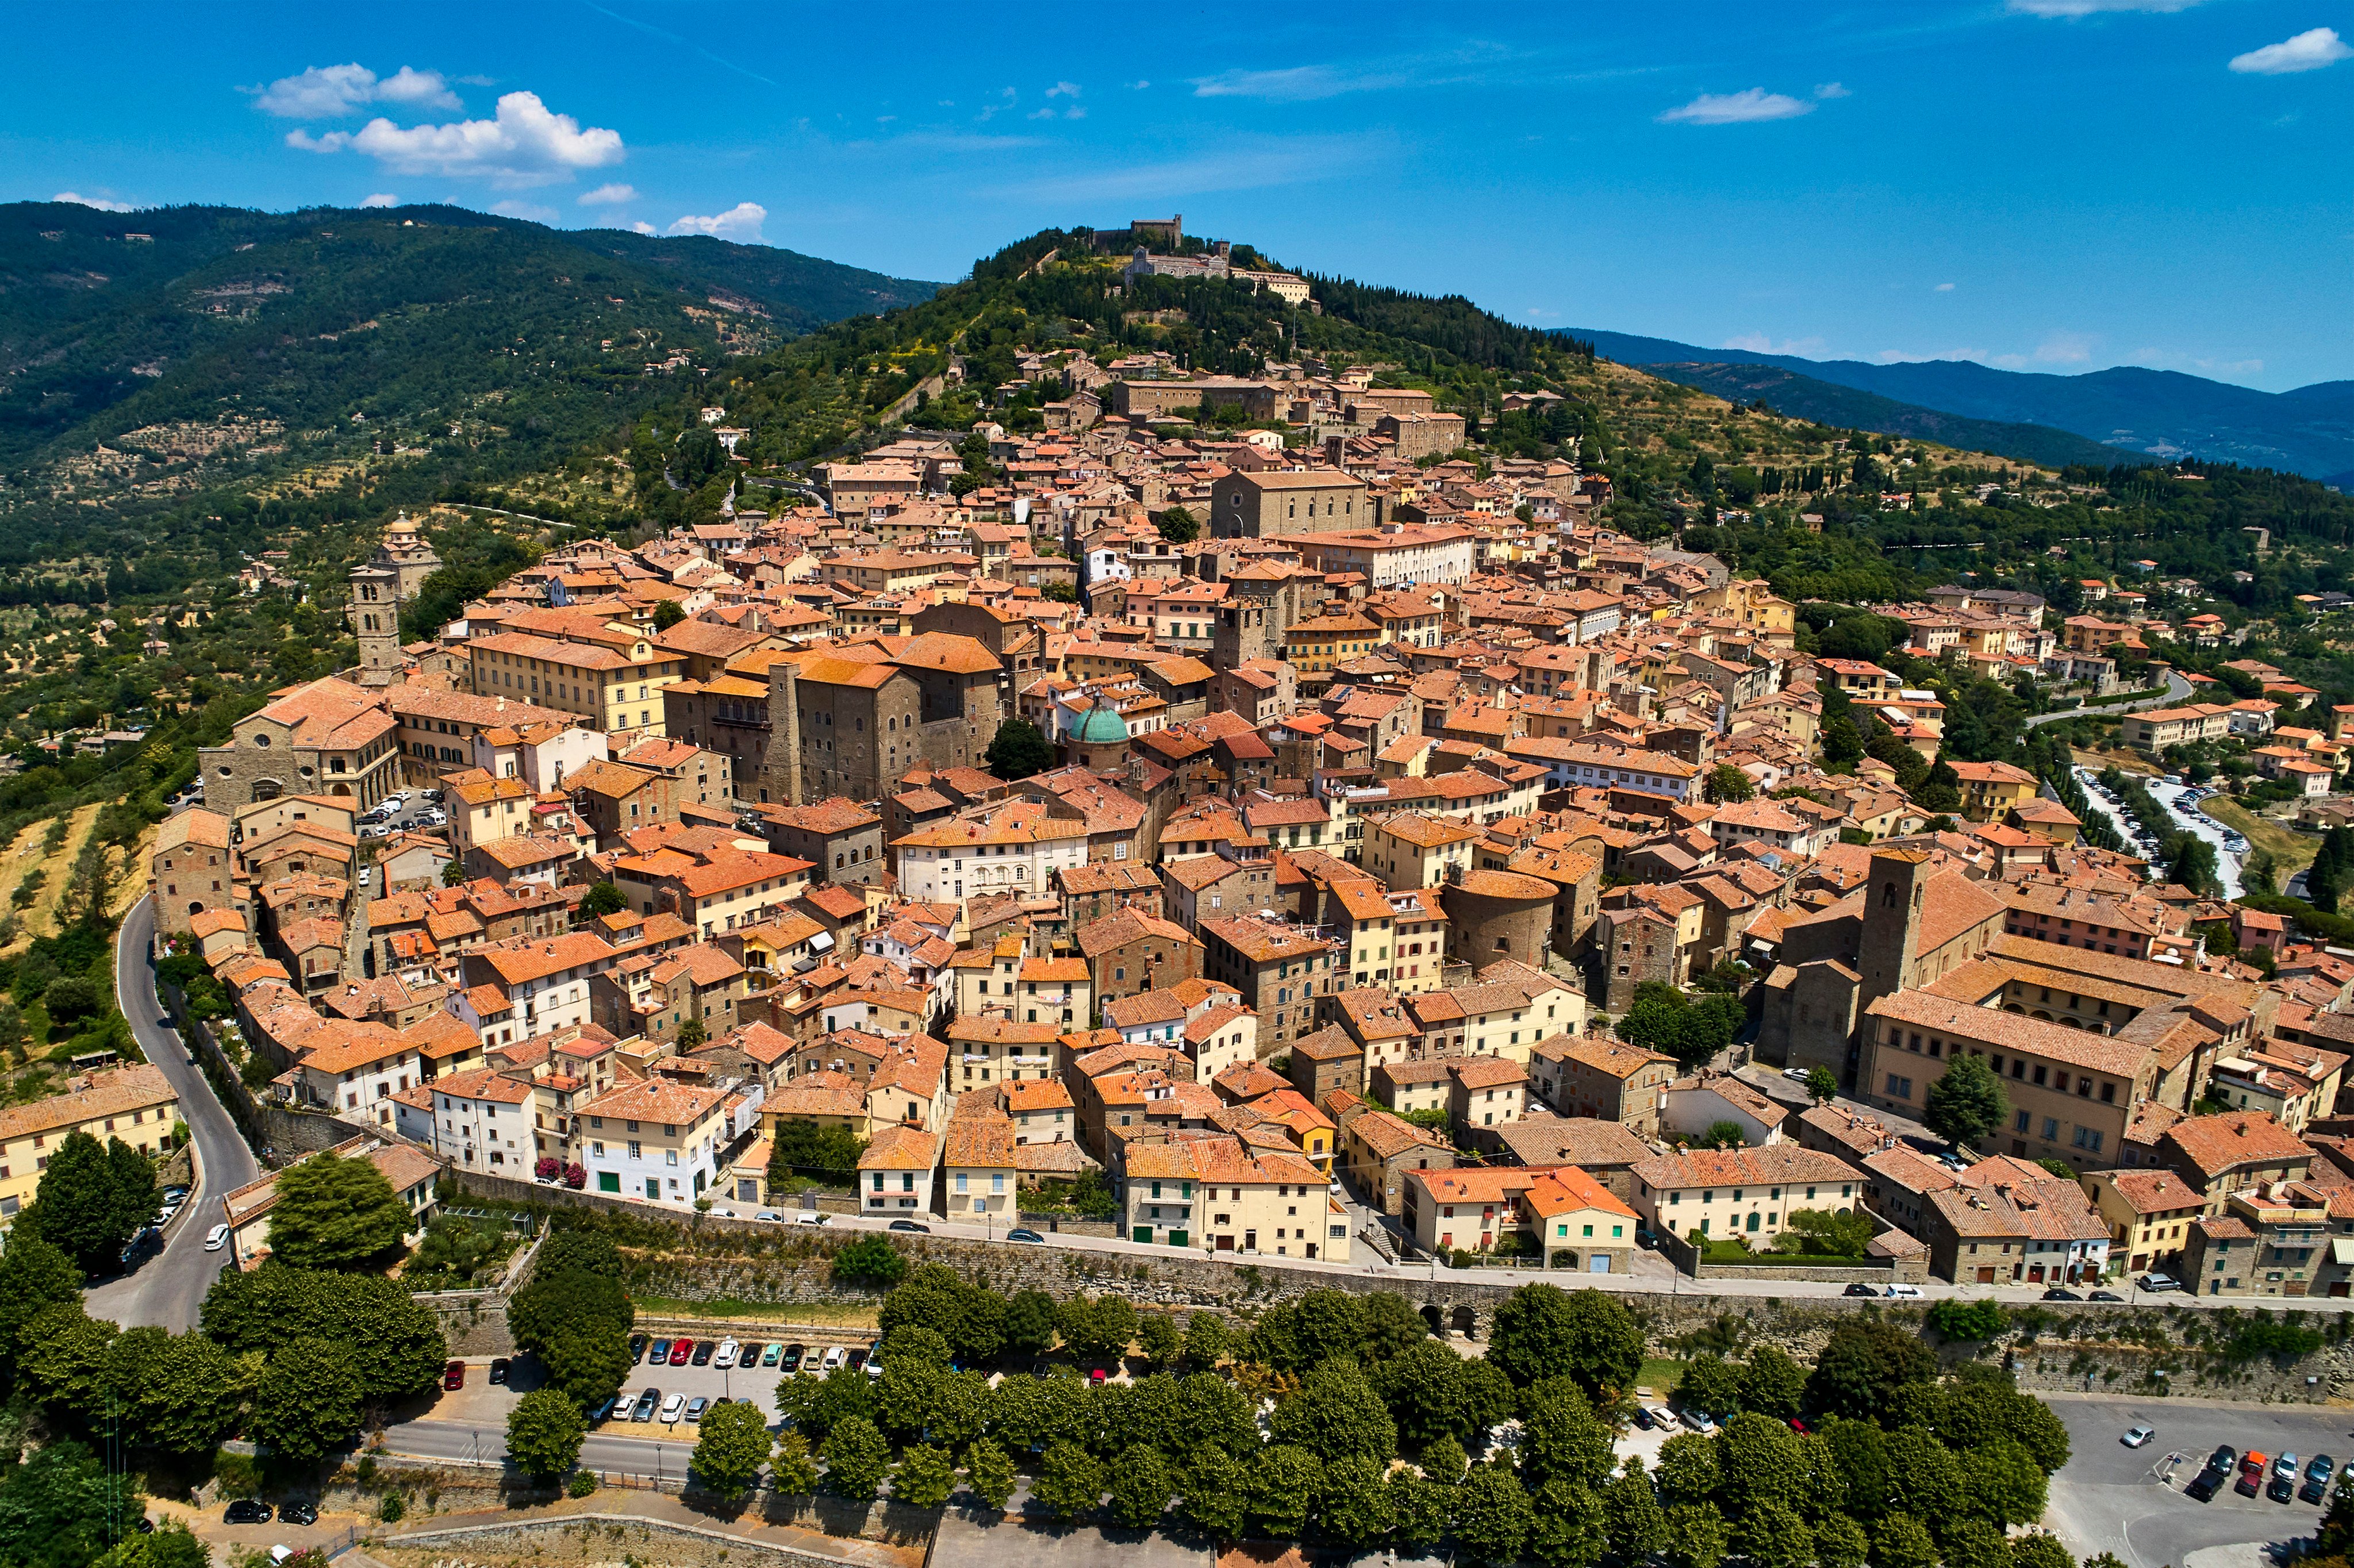 The Tuscan countryside in Italy. The government has for years experimented with various schemes to attract new residents to the nation’s rural regions. Photo: Getty Images